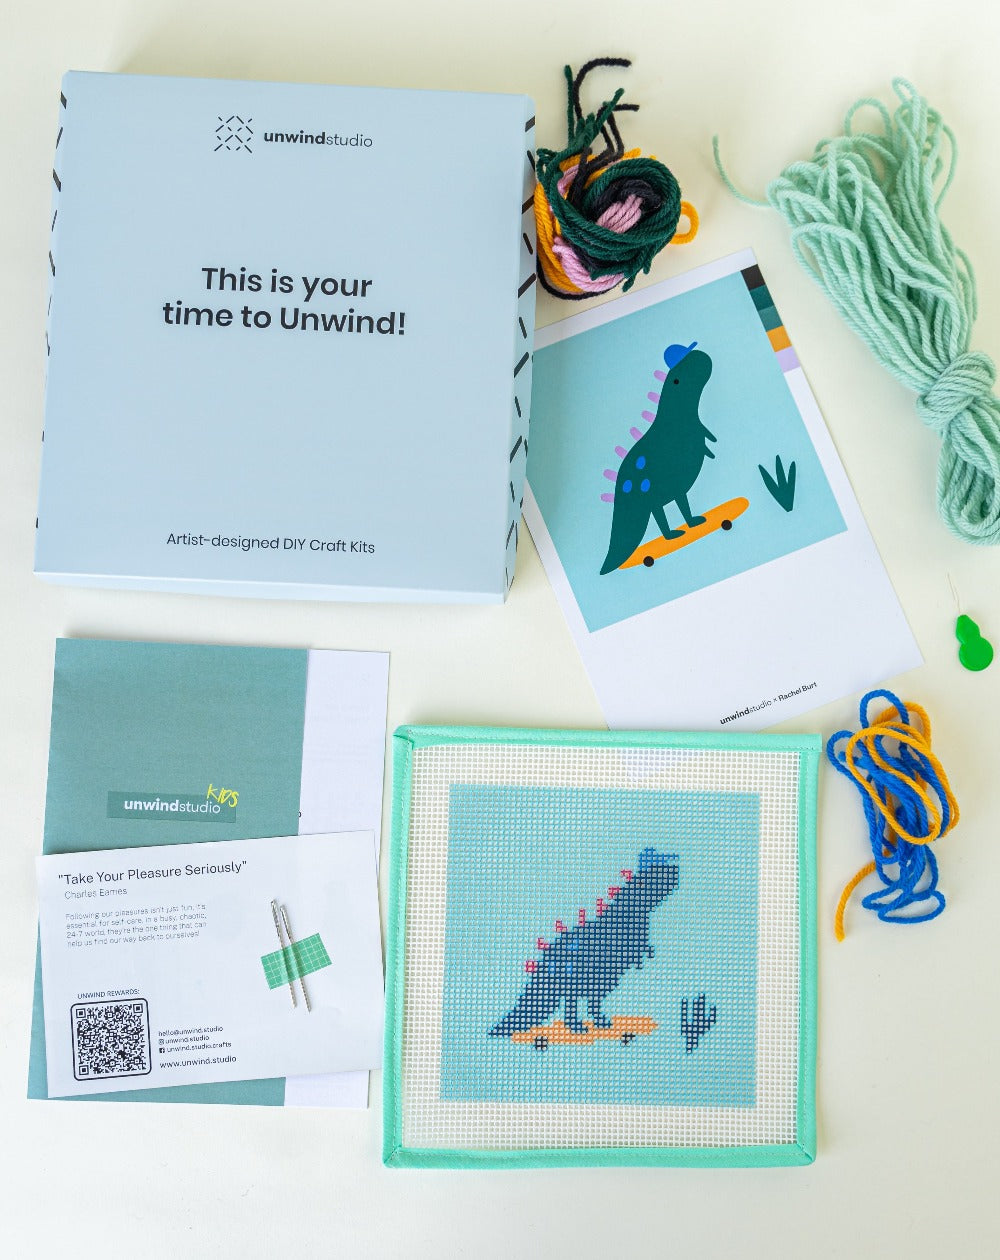 Dino The Skater - Needlepoint Kit for Kids by Unwind Studio, children's crafts embroidery for kids